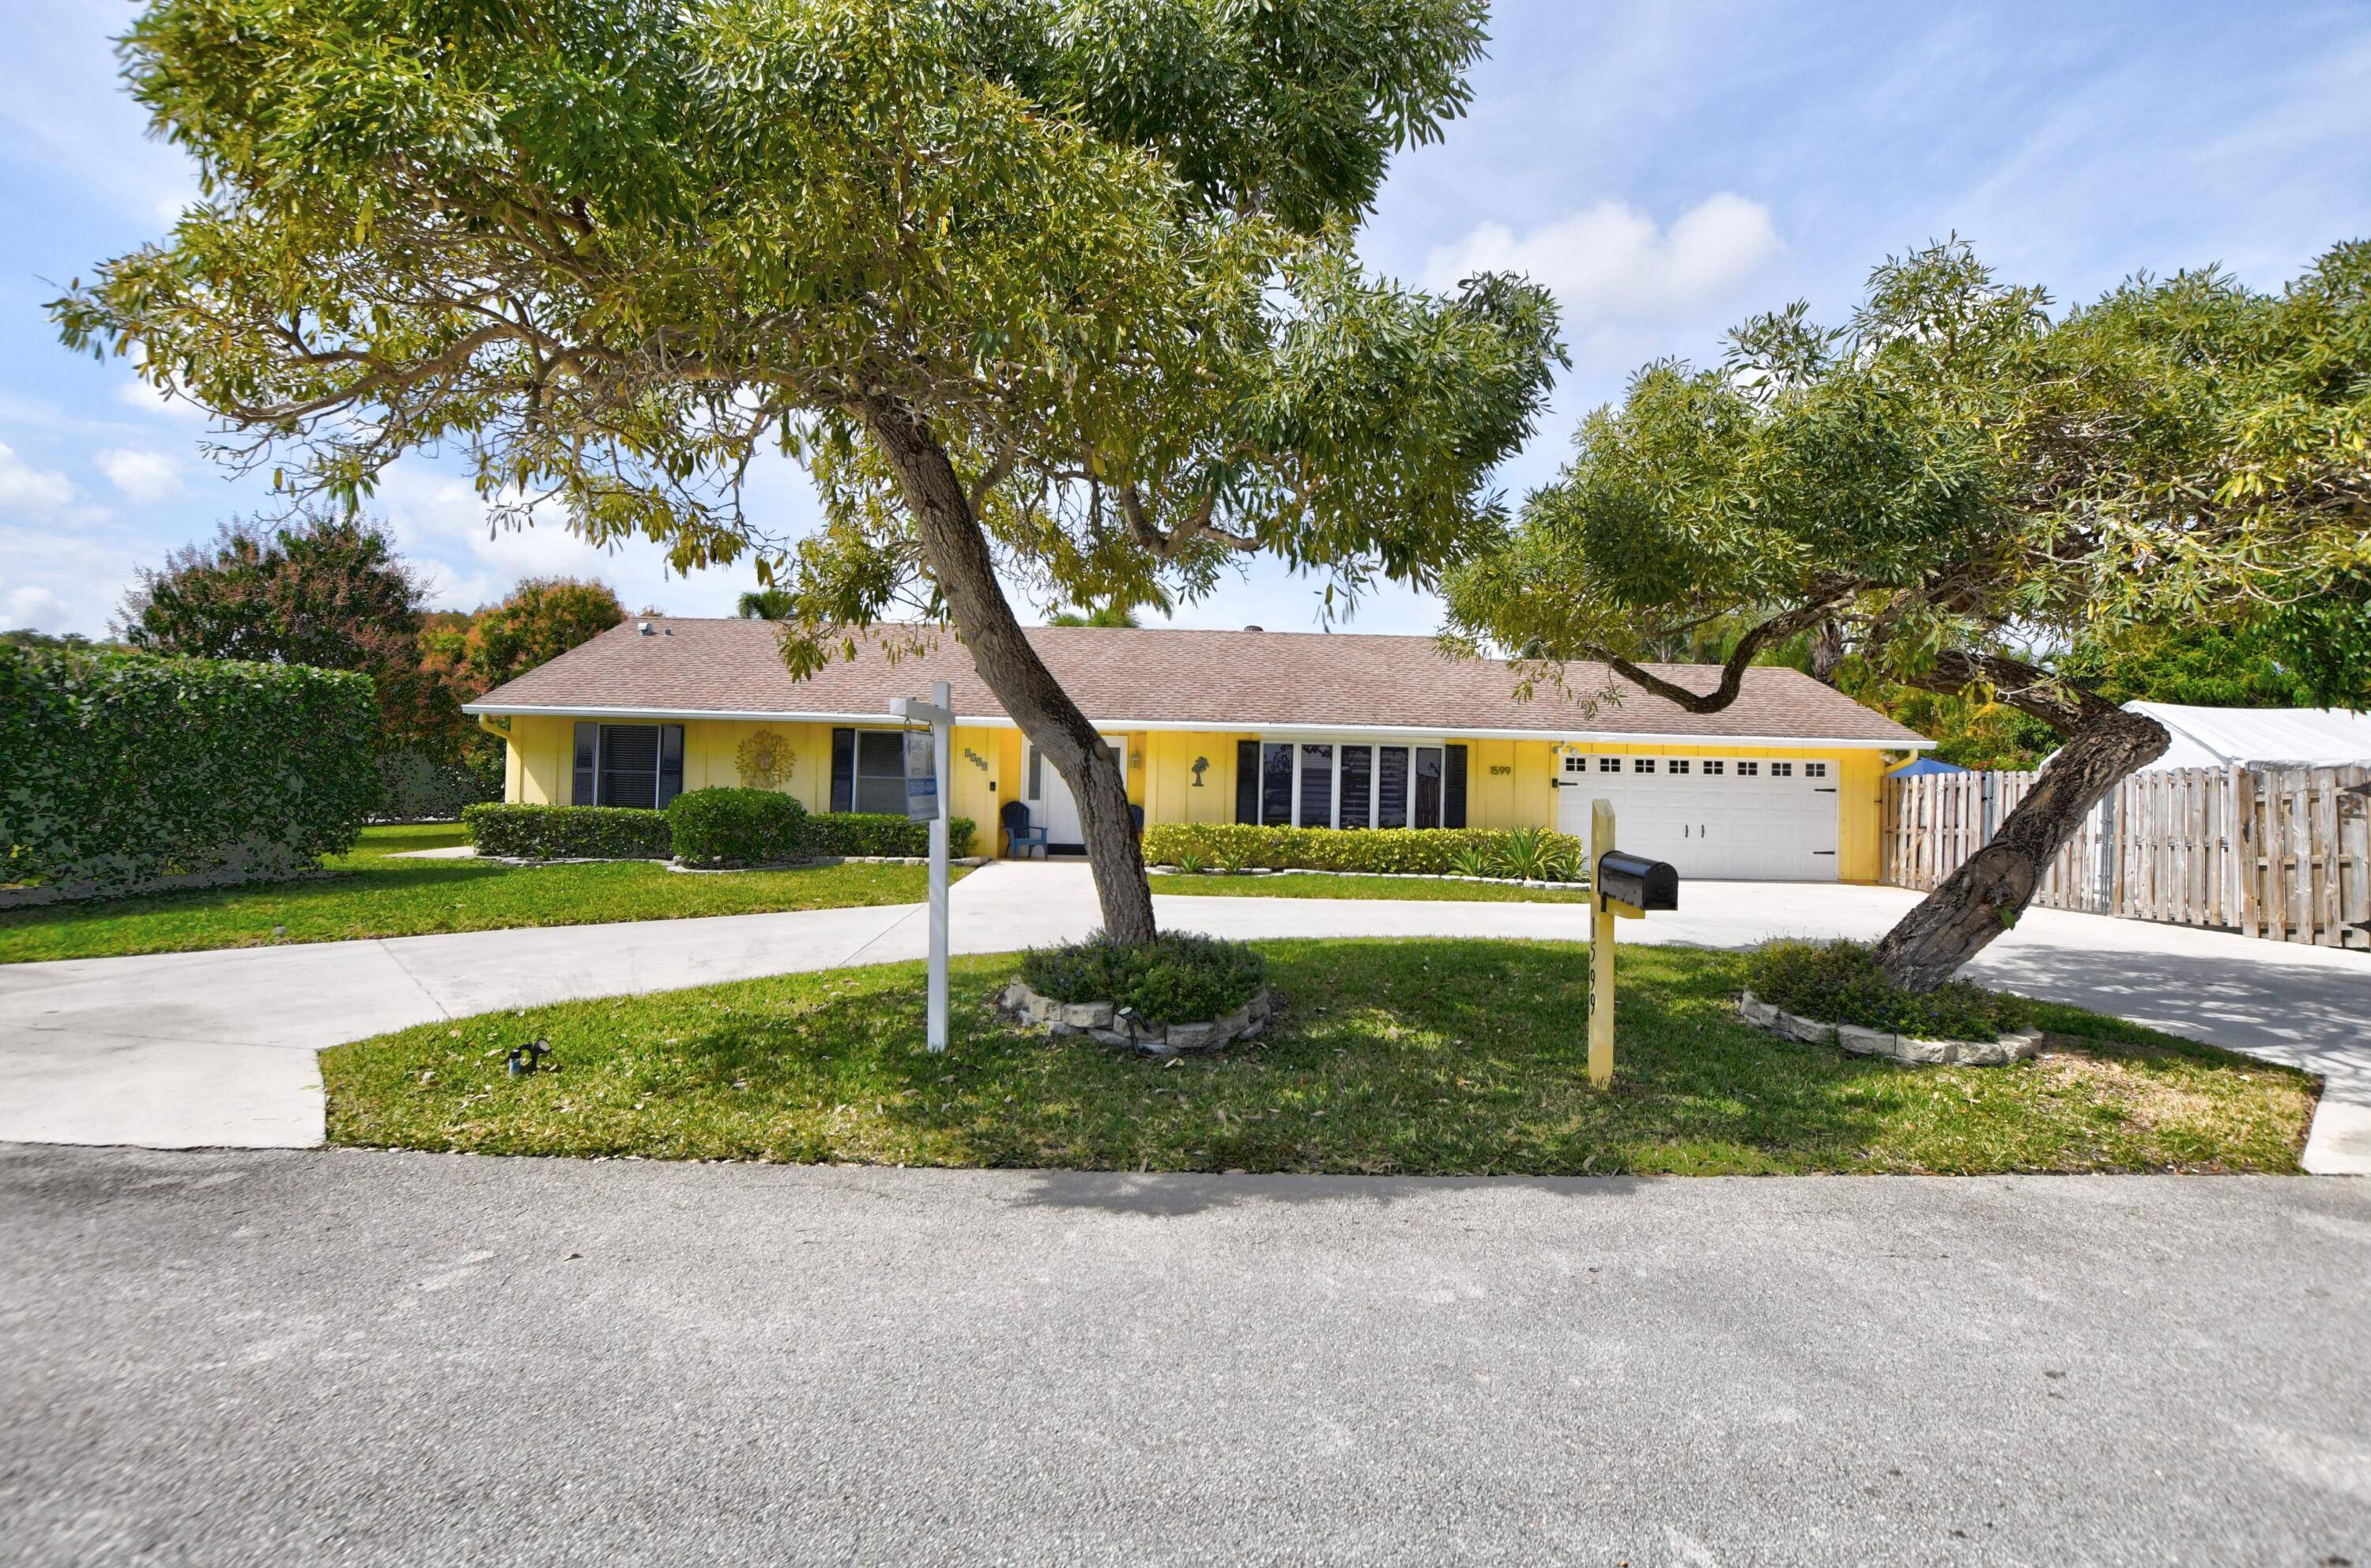 NO HOA ! OVERSIZED CORNER LOT IN THE HIGHLY COVETED PALM BEACH FARMS COMMUNITY AND ADDISON MIZNER SCHOOL DISTRICT.